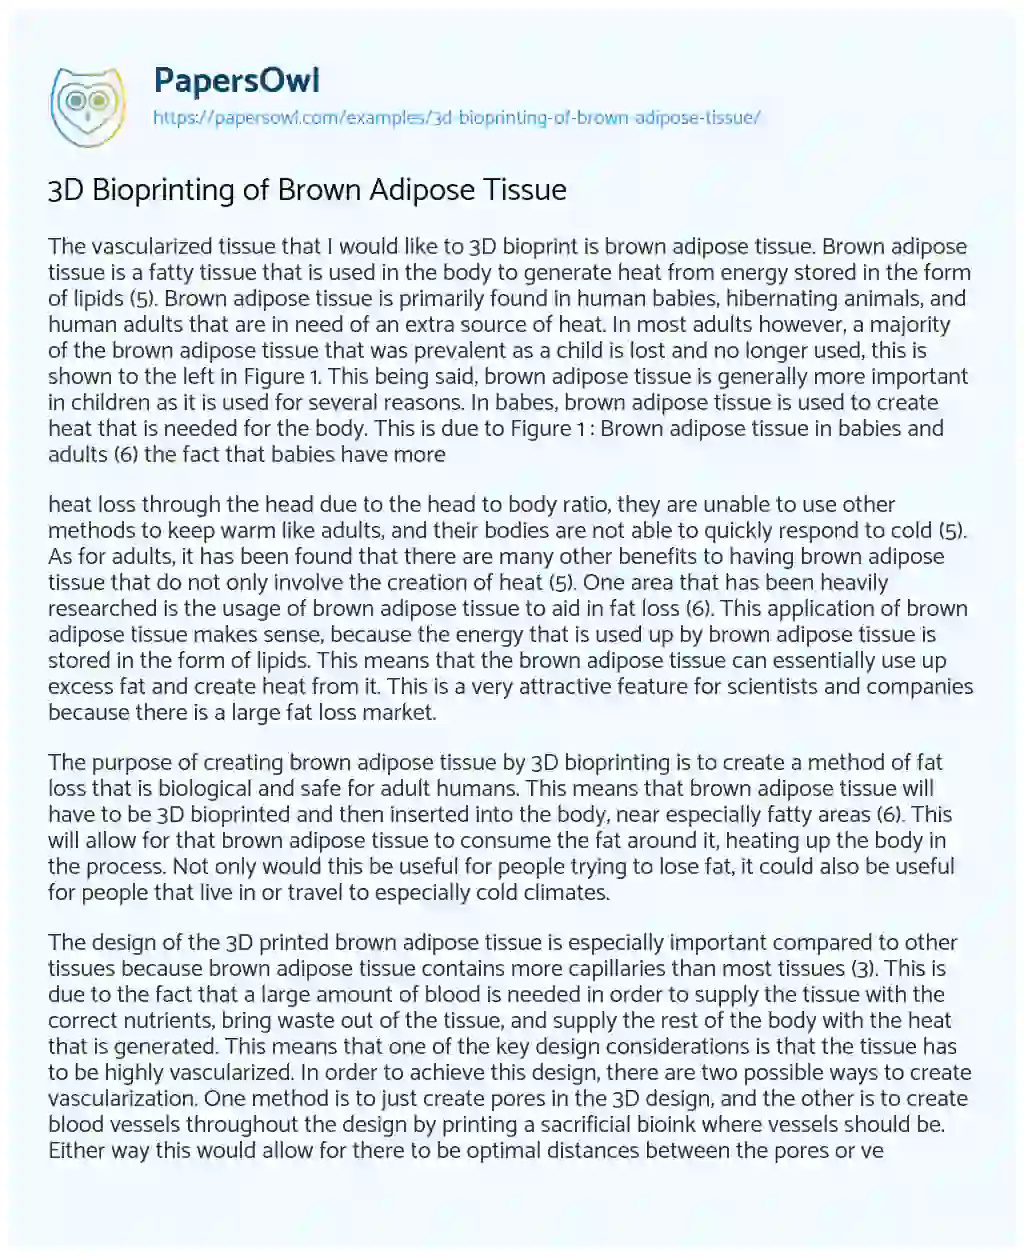 Essay on 3D Bioprinting of Brown Adipose Tissue